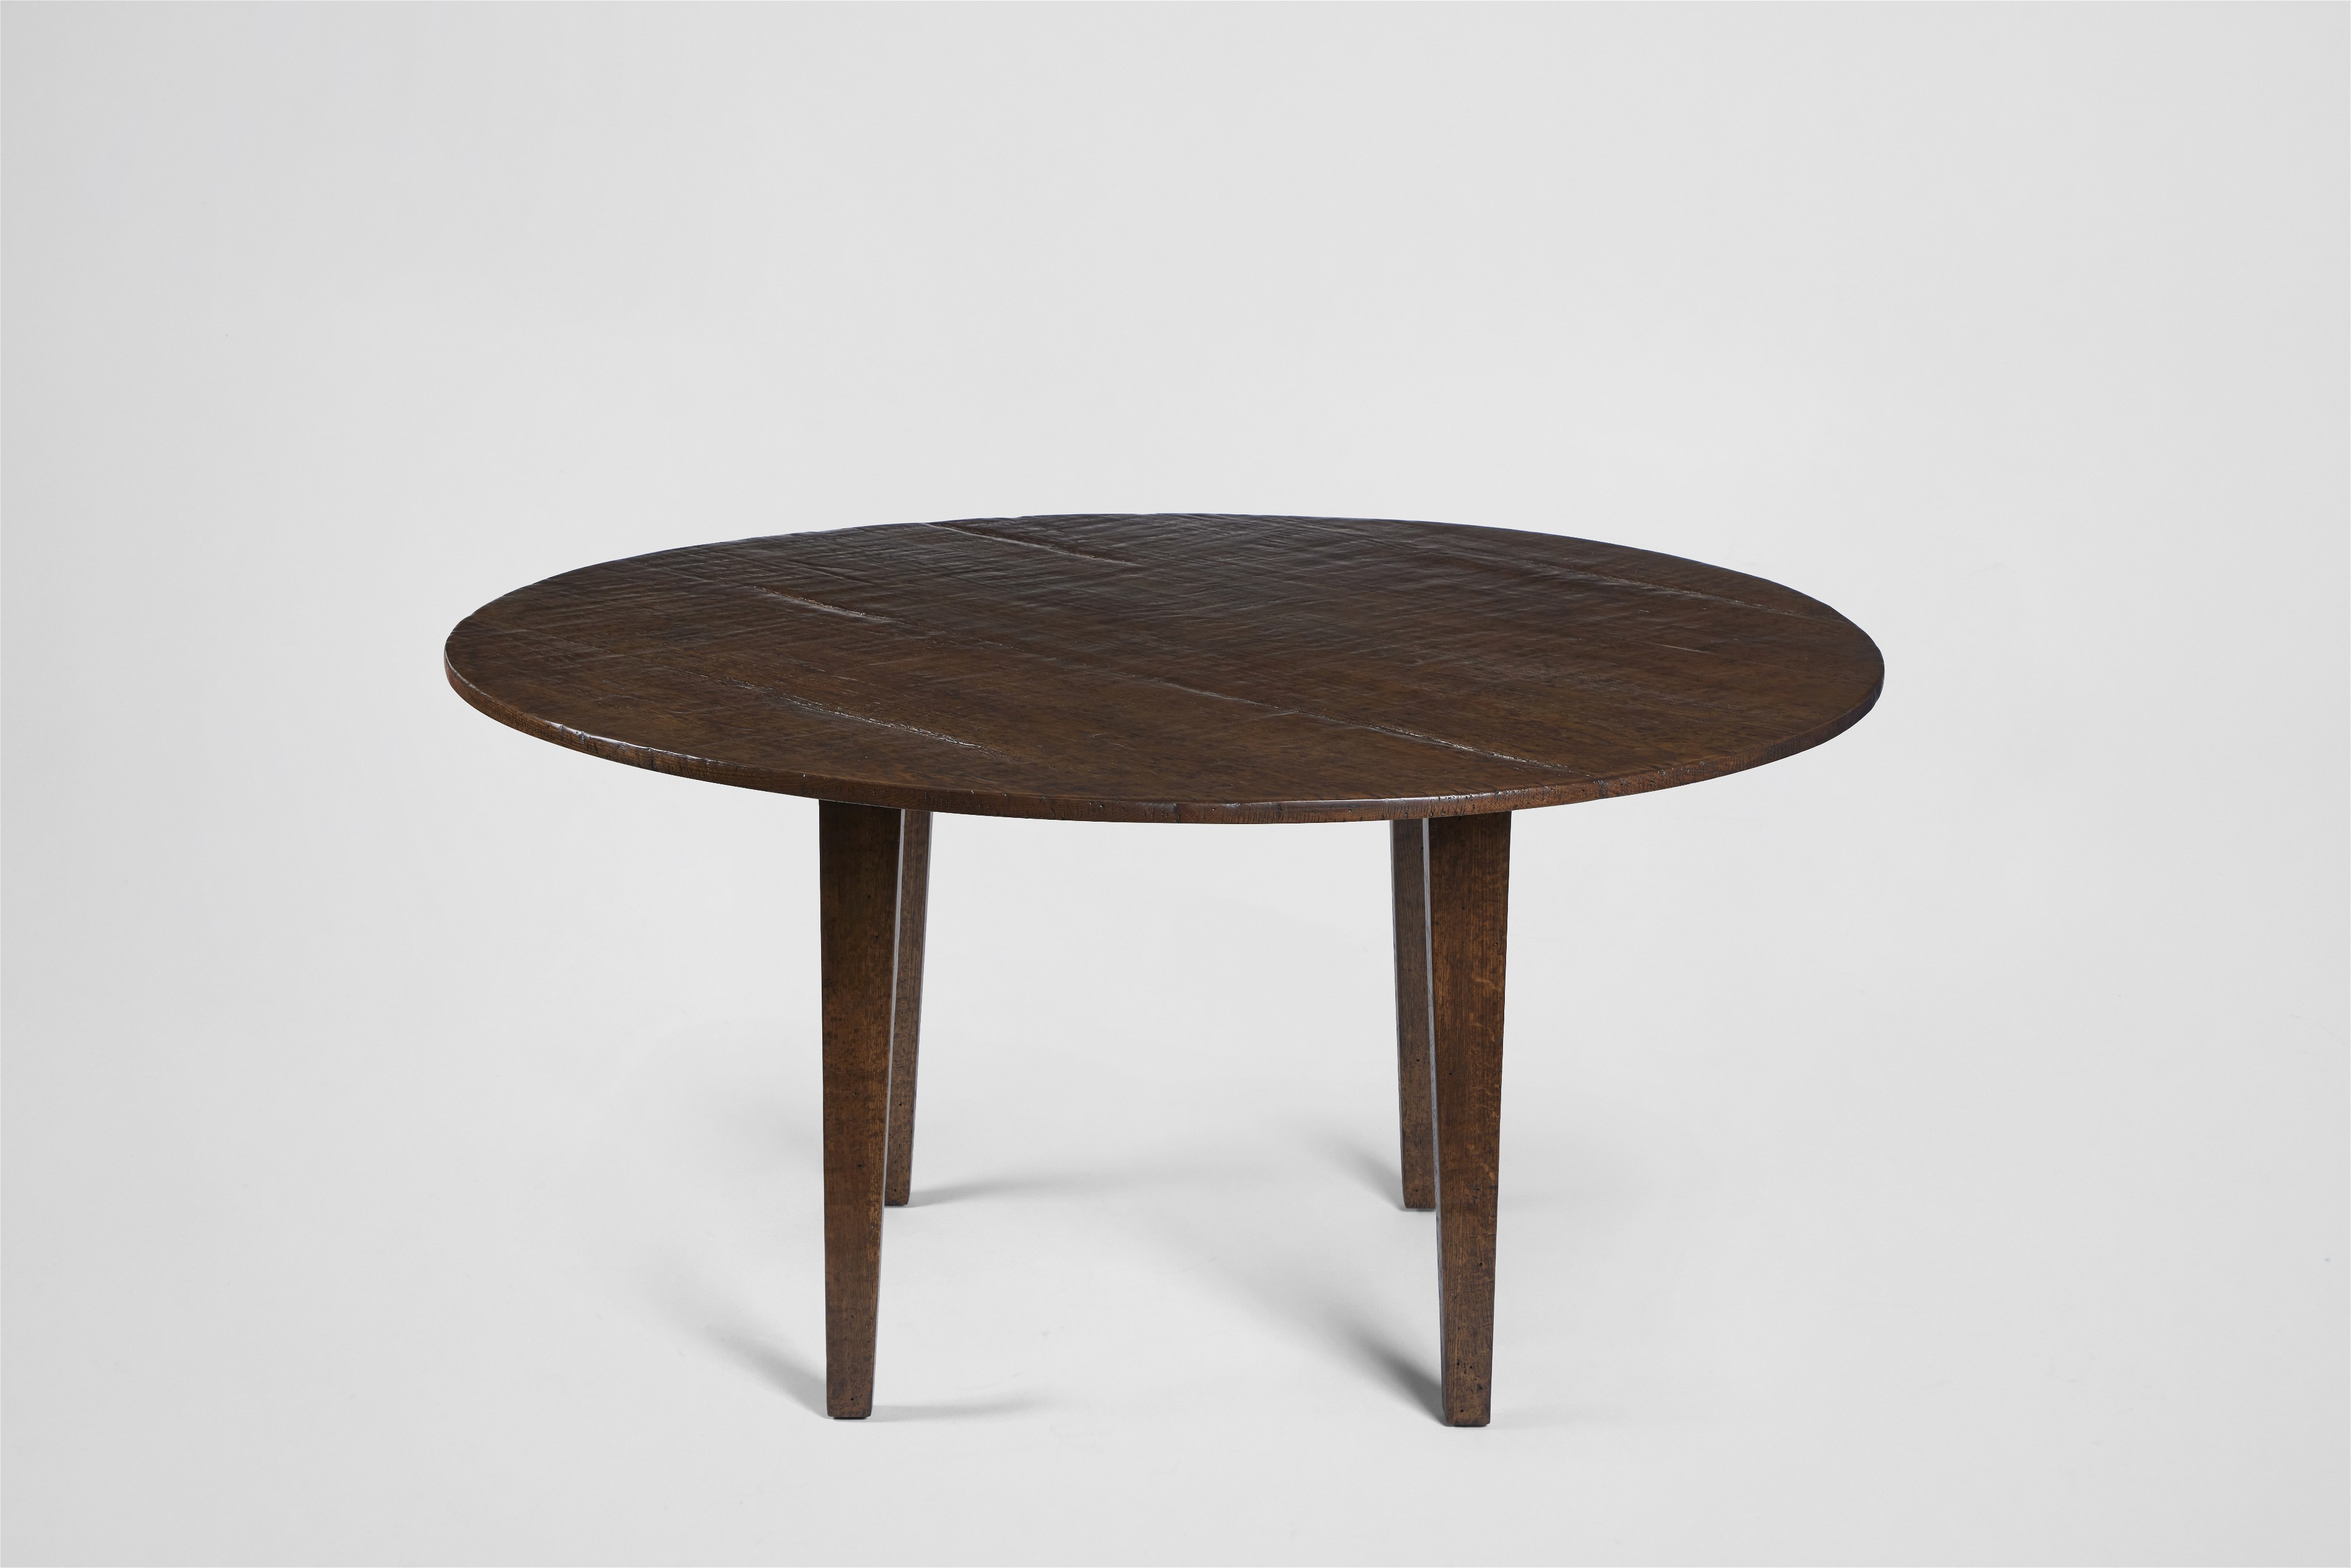 a round wooden table with two legs